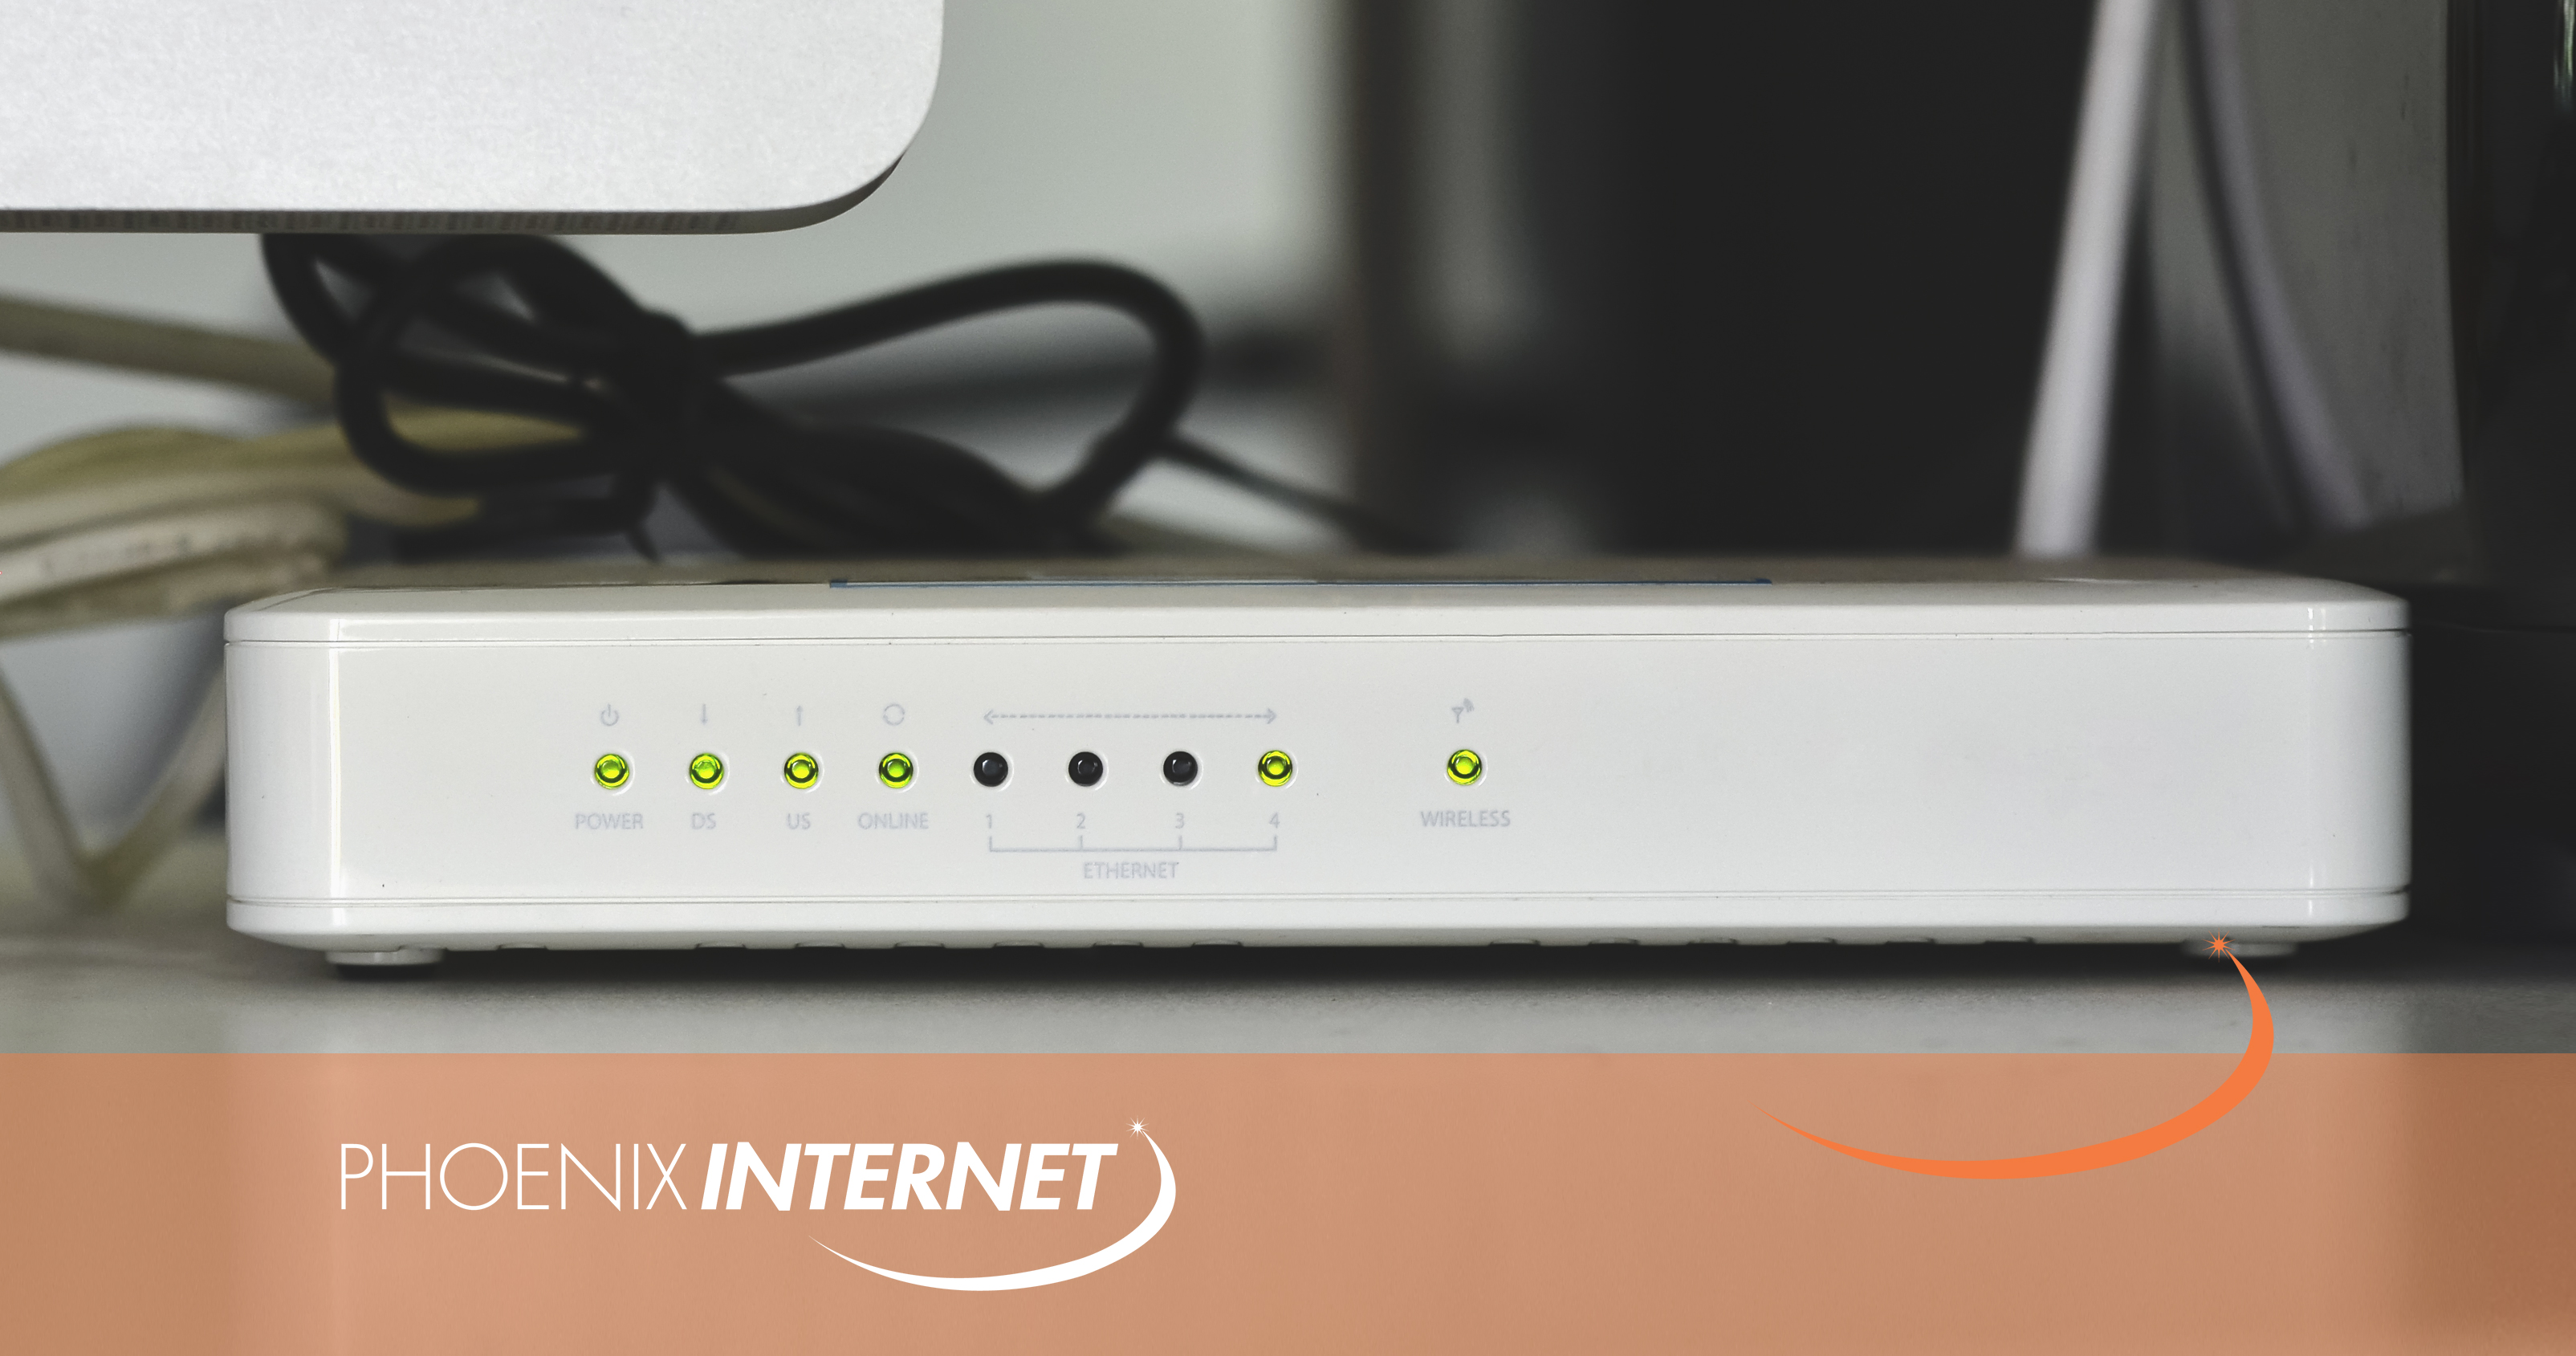 Where is The Best Place to Put a Router? - Phoenix Internet